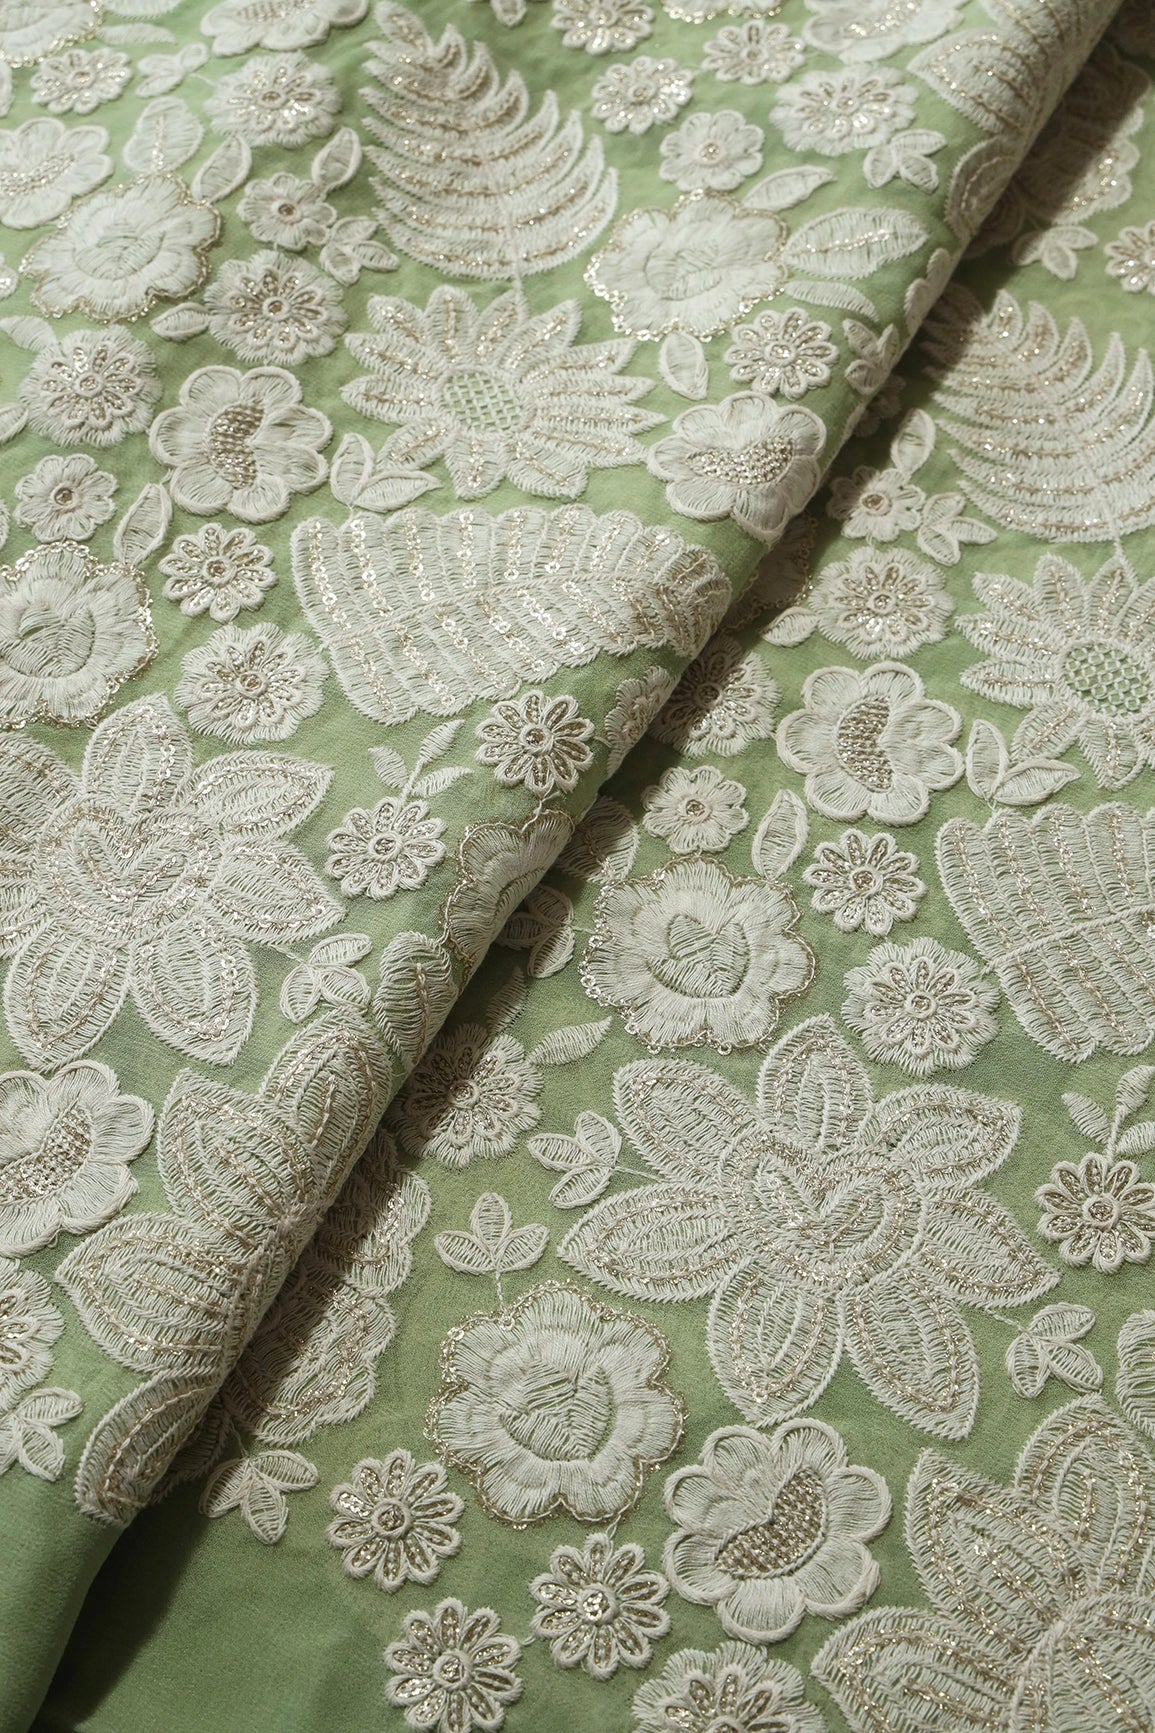 White Thread With Sequins Heavy Floral Embroidery On Parrot Green Viscose Georgette Fabric